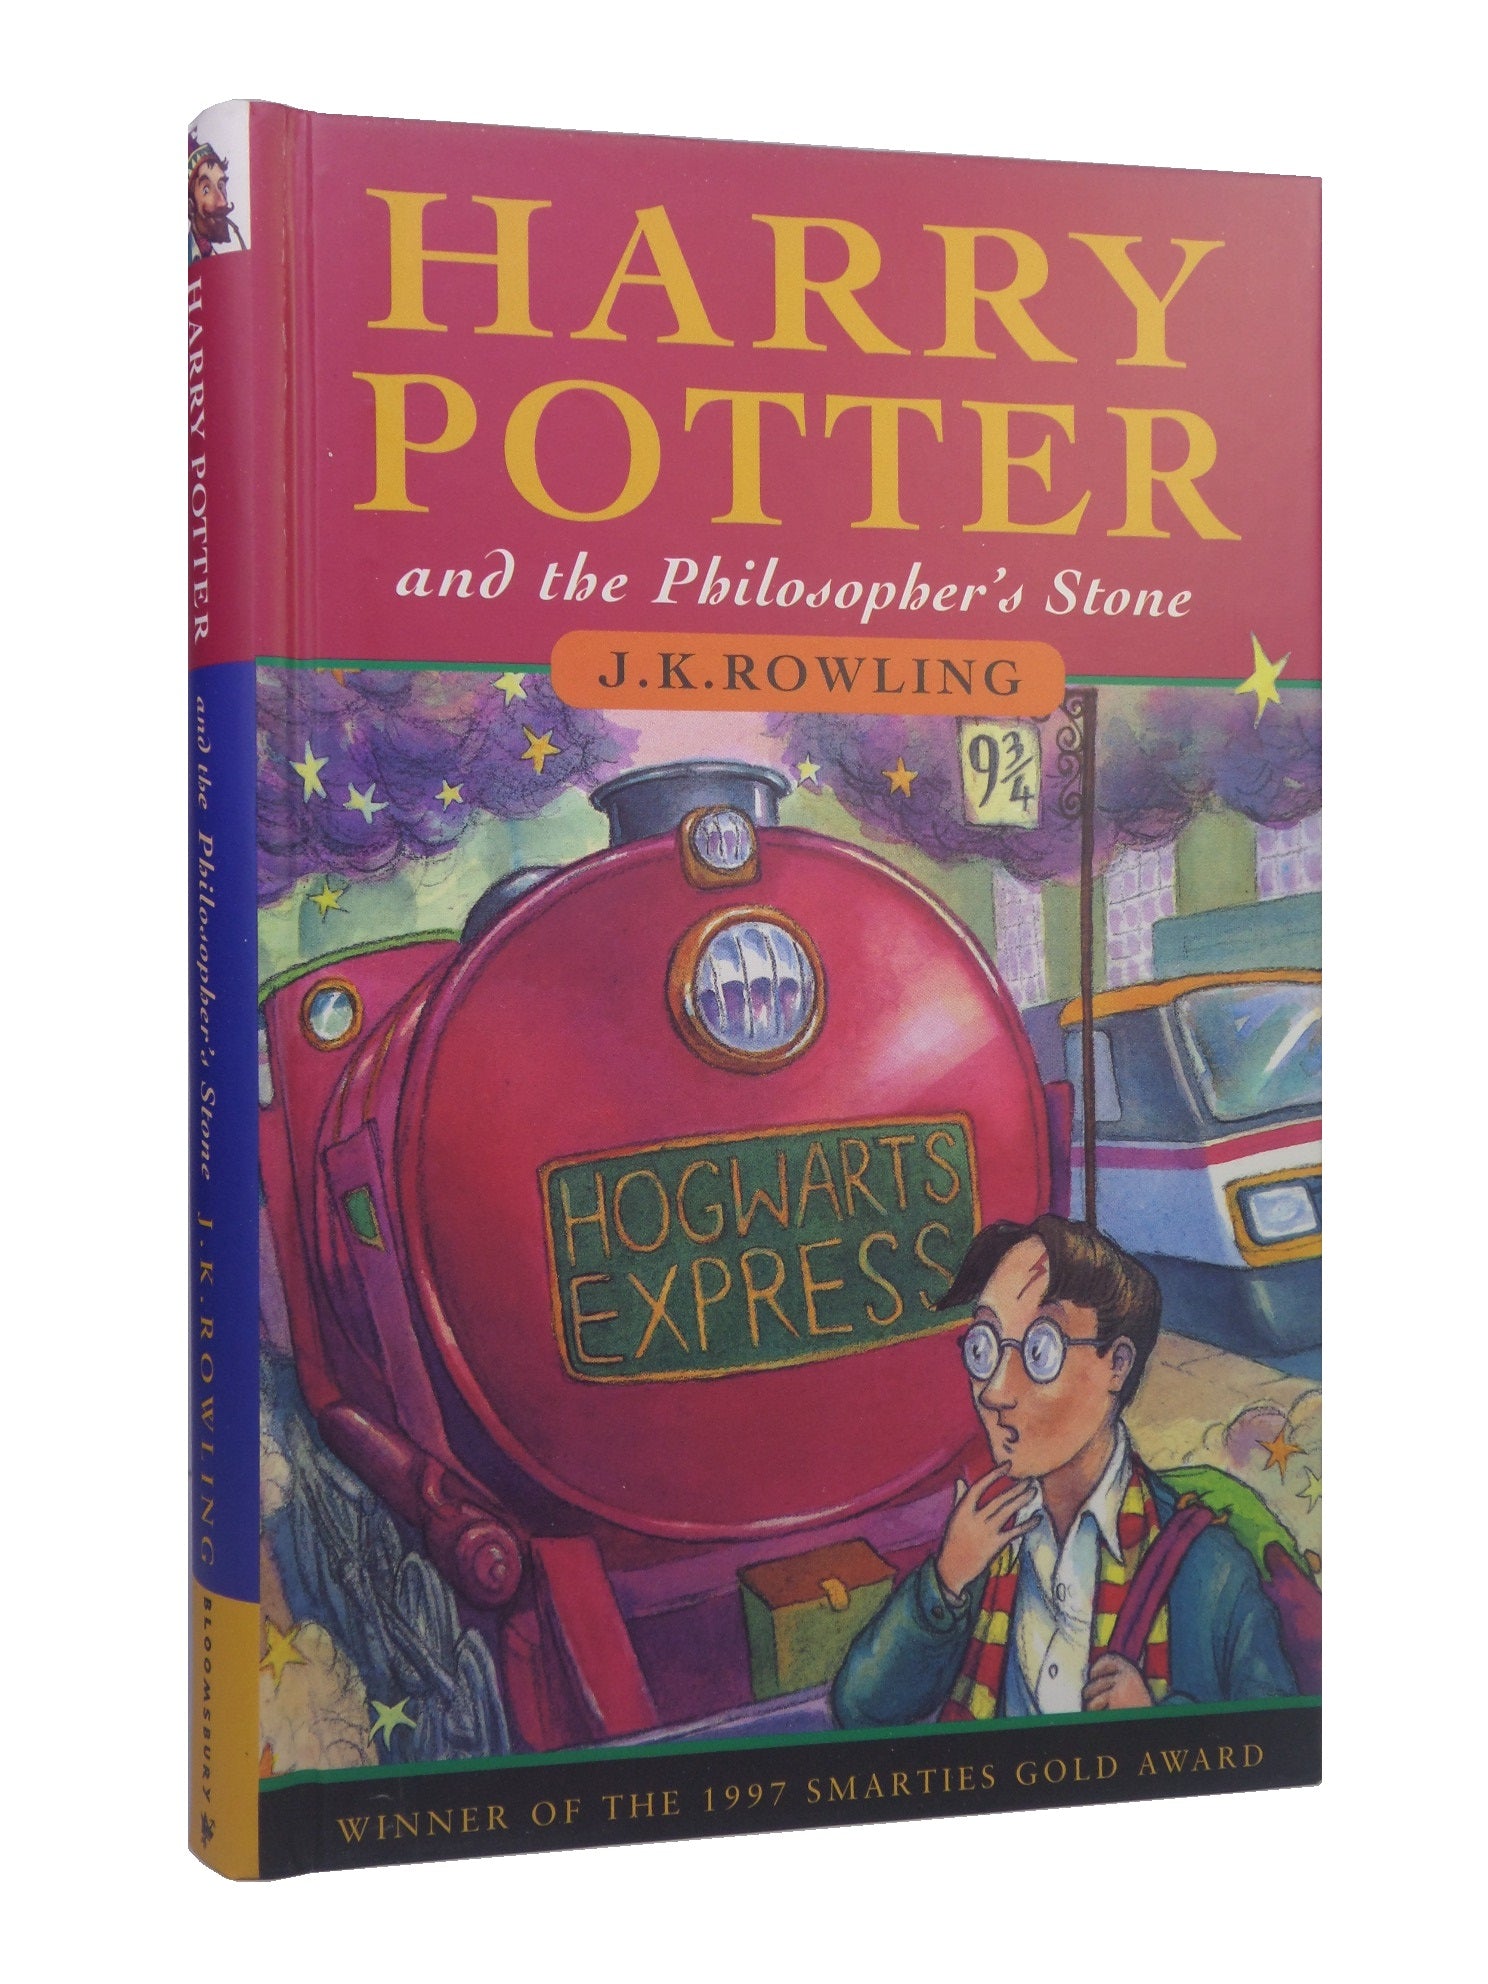 HARRY POTTER AND THE PHILOSOPHER'S STONE 1997 J.K. ROWLING BLOOMSBURY 11TH PRINT